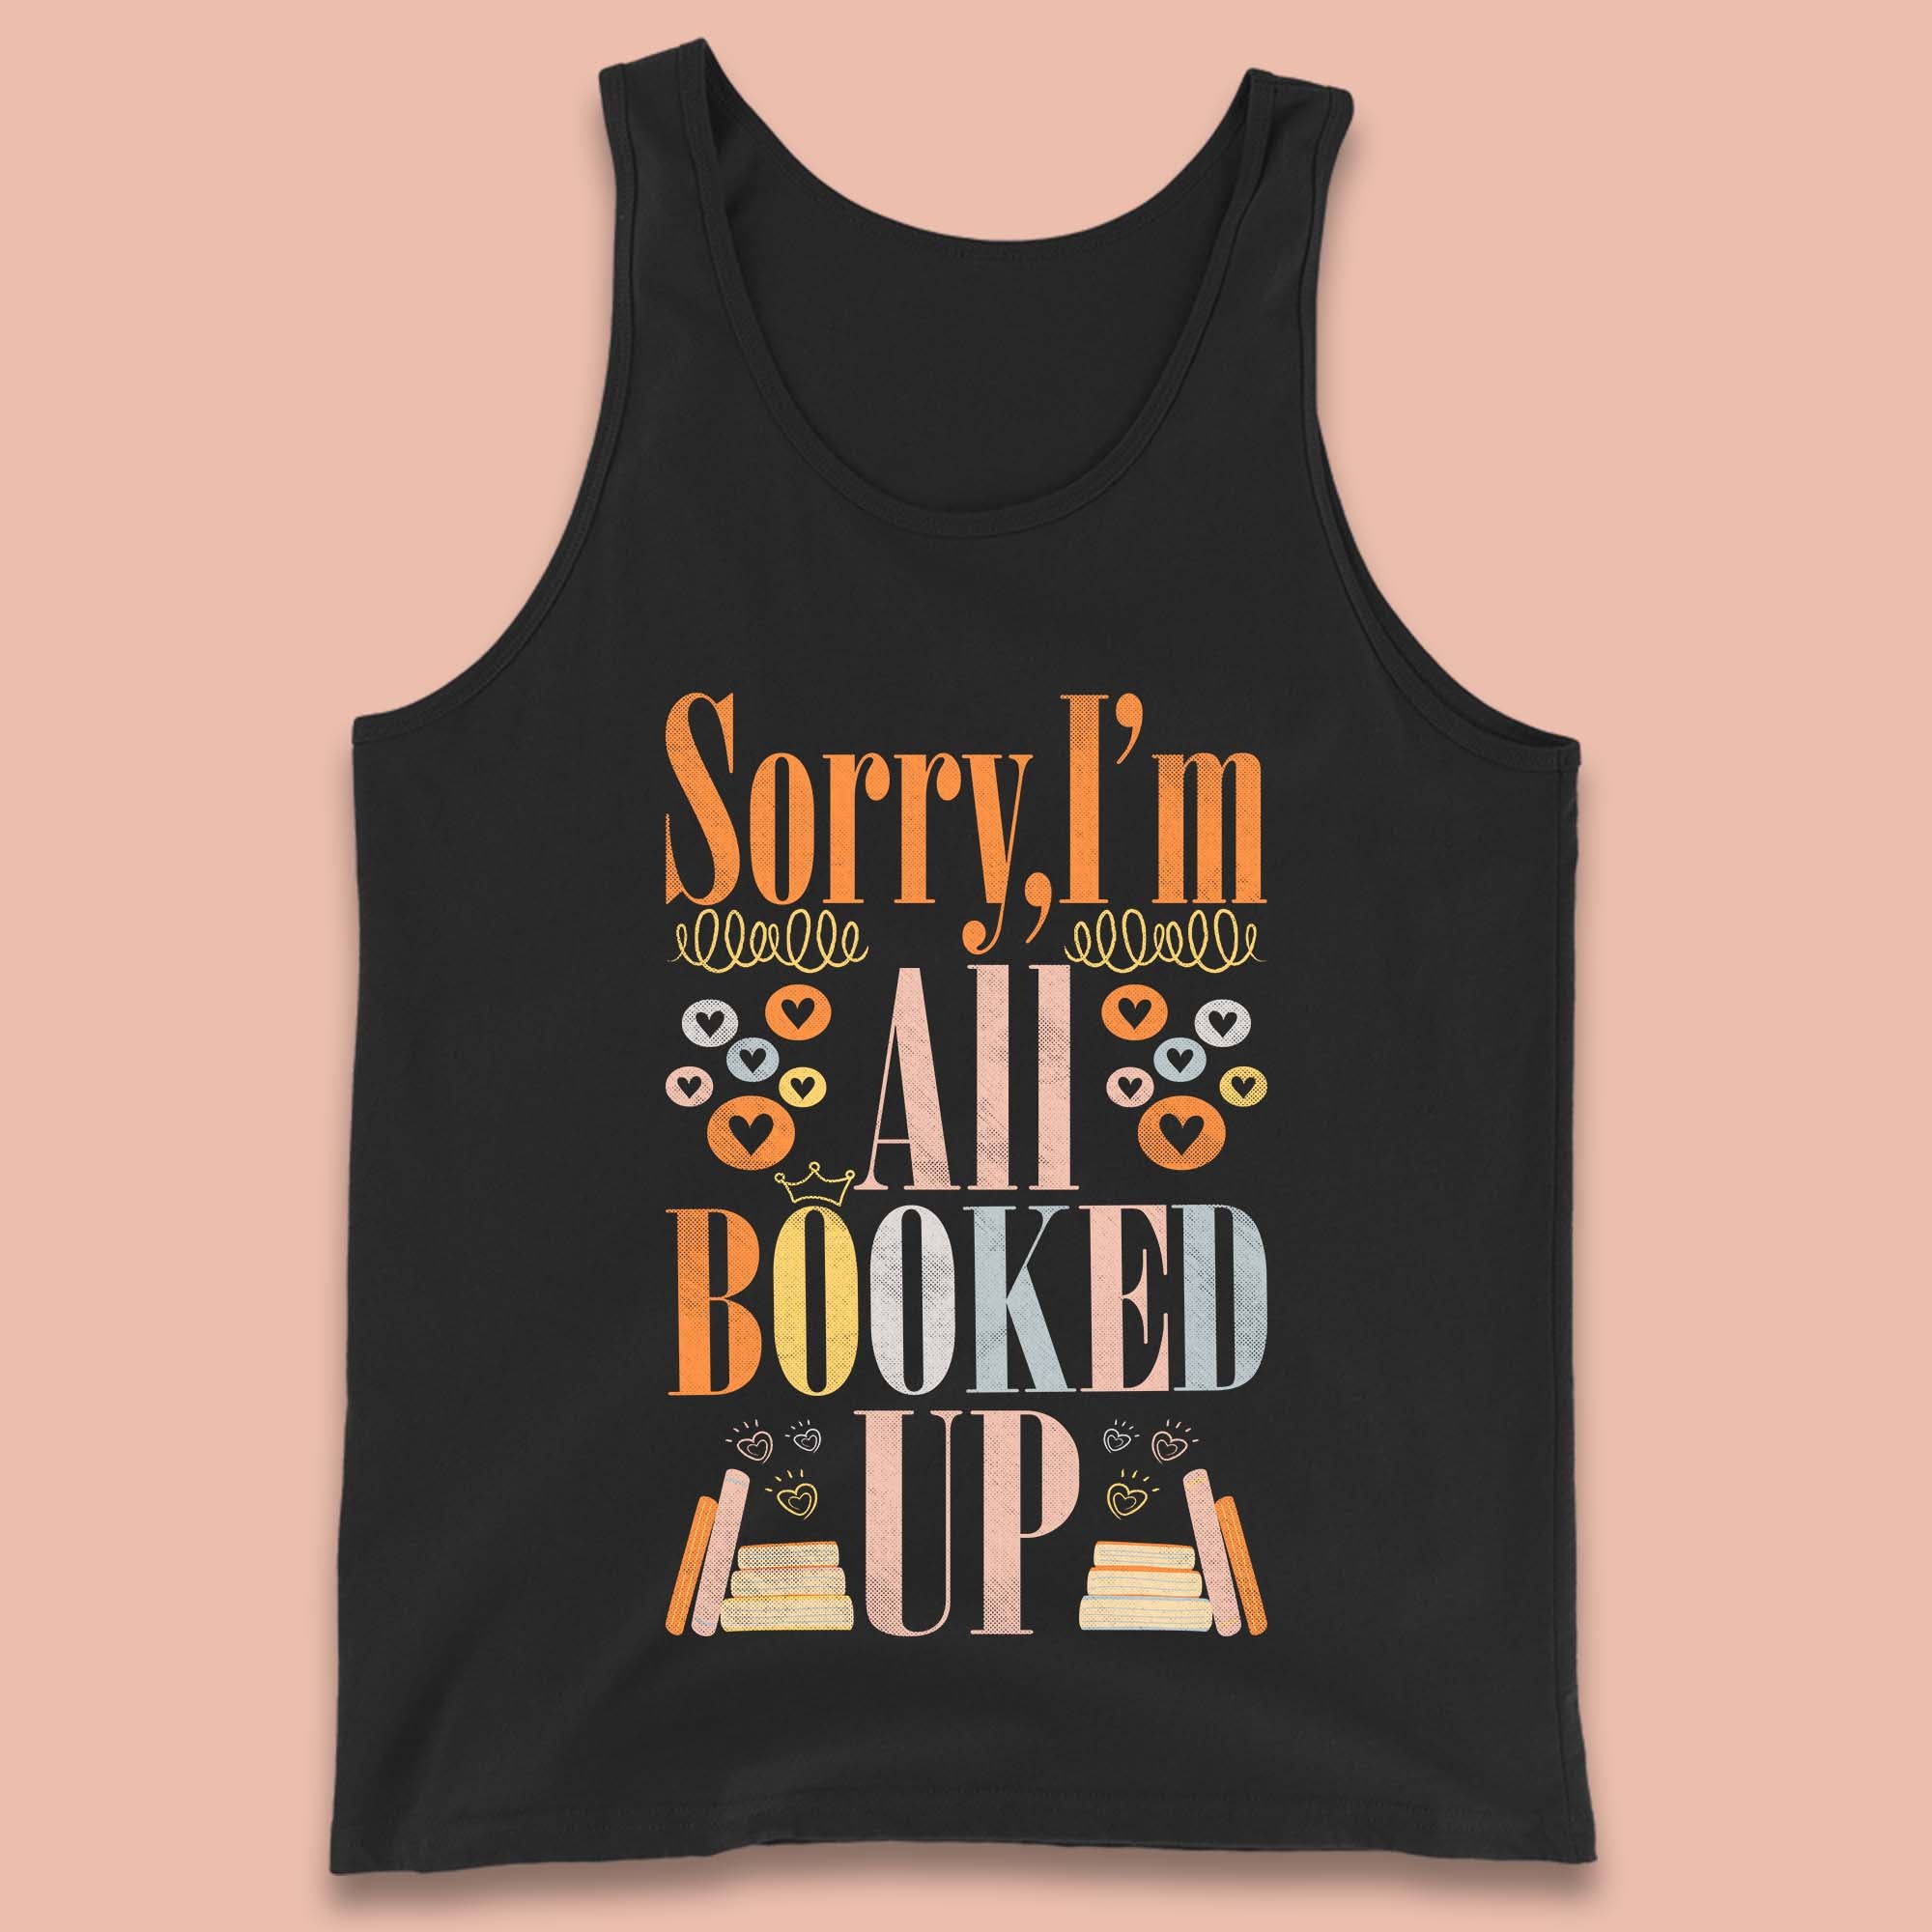 Sorry I'm All Booked Up Book Lover Book Nerd Bookish Librarian Tank Top